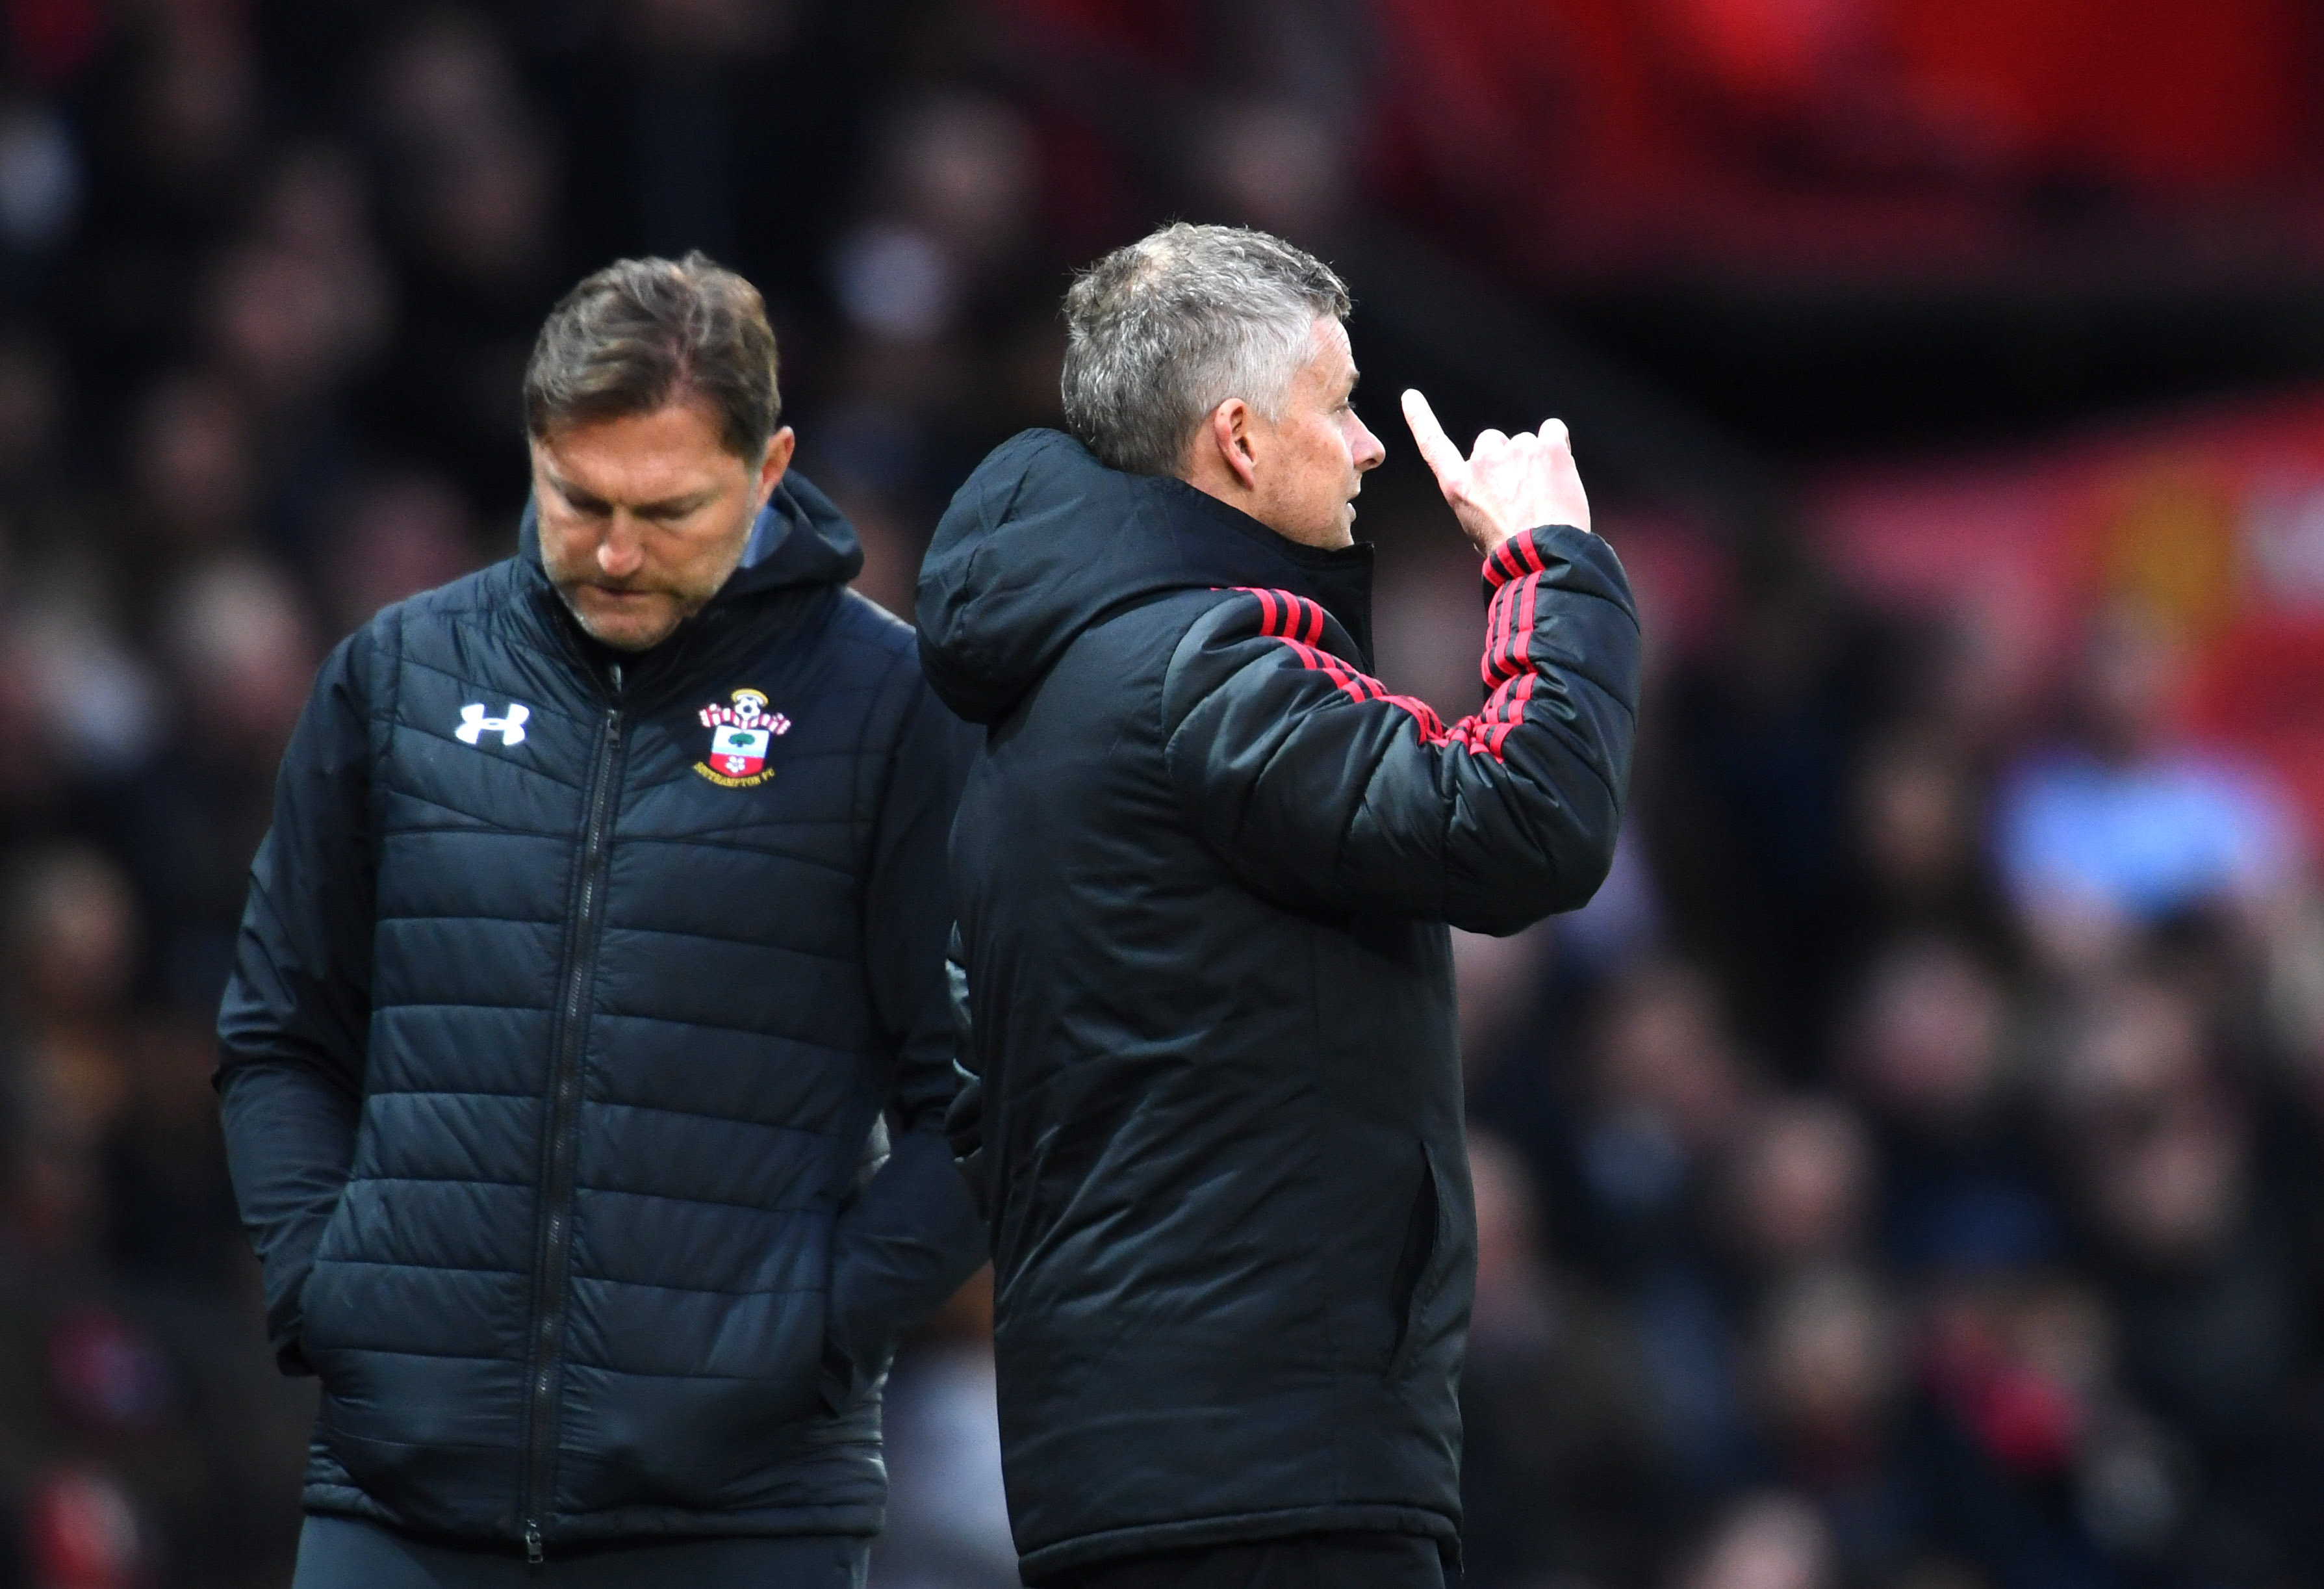 MANCHESTER, ENGLAND - MARCH 02: Ole Gunnar Solskjaer, Interim Manager of Manchester Unted  gives his team instructions during the Premier League match between Manchester United and Southampton FC at Old Trafford on March 02, 2019 in Manchester, United Kingdom. (Photo by Clive Mason/Getty Images)